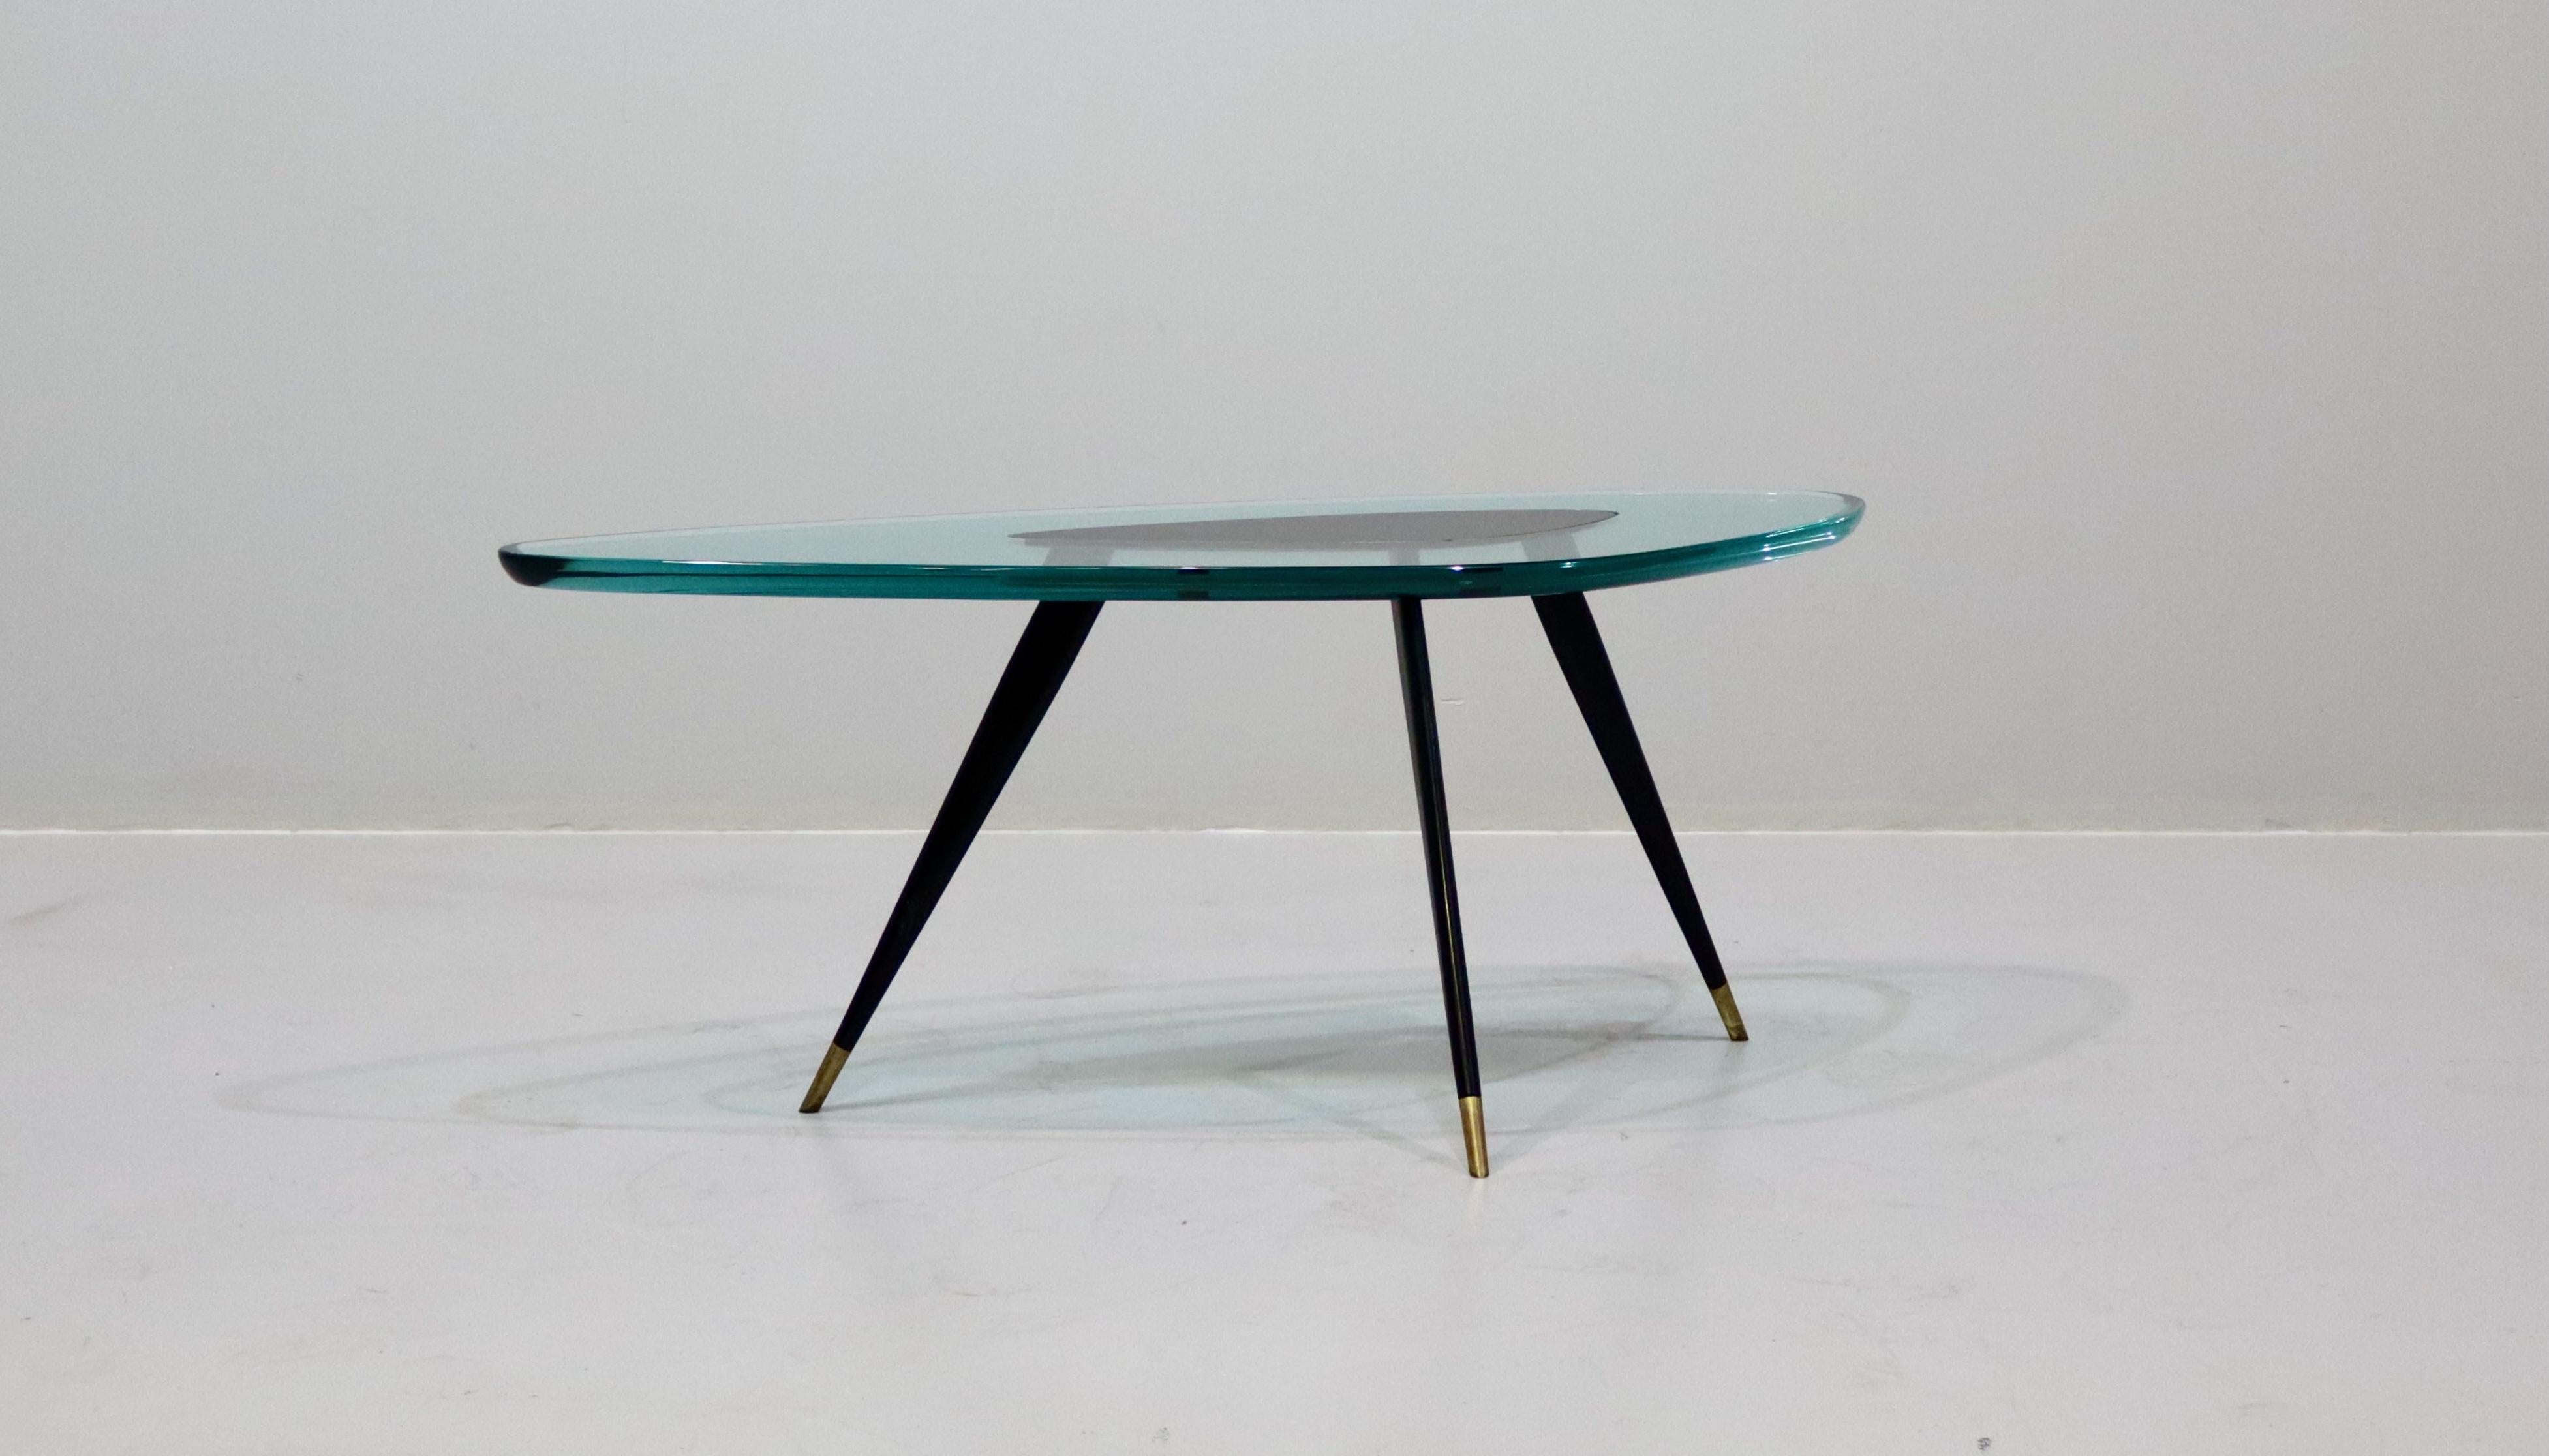 Max Ingrand (1908–1969)
coffee tables
Glass, lacquered metal and brass
Edited by Fontana Arte
Model created circa 1959
H 40 × W 99 × D 39 cm
Bibliography: Domus, No. 361, December 1959, similar model illustrated n.p